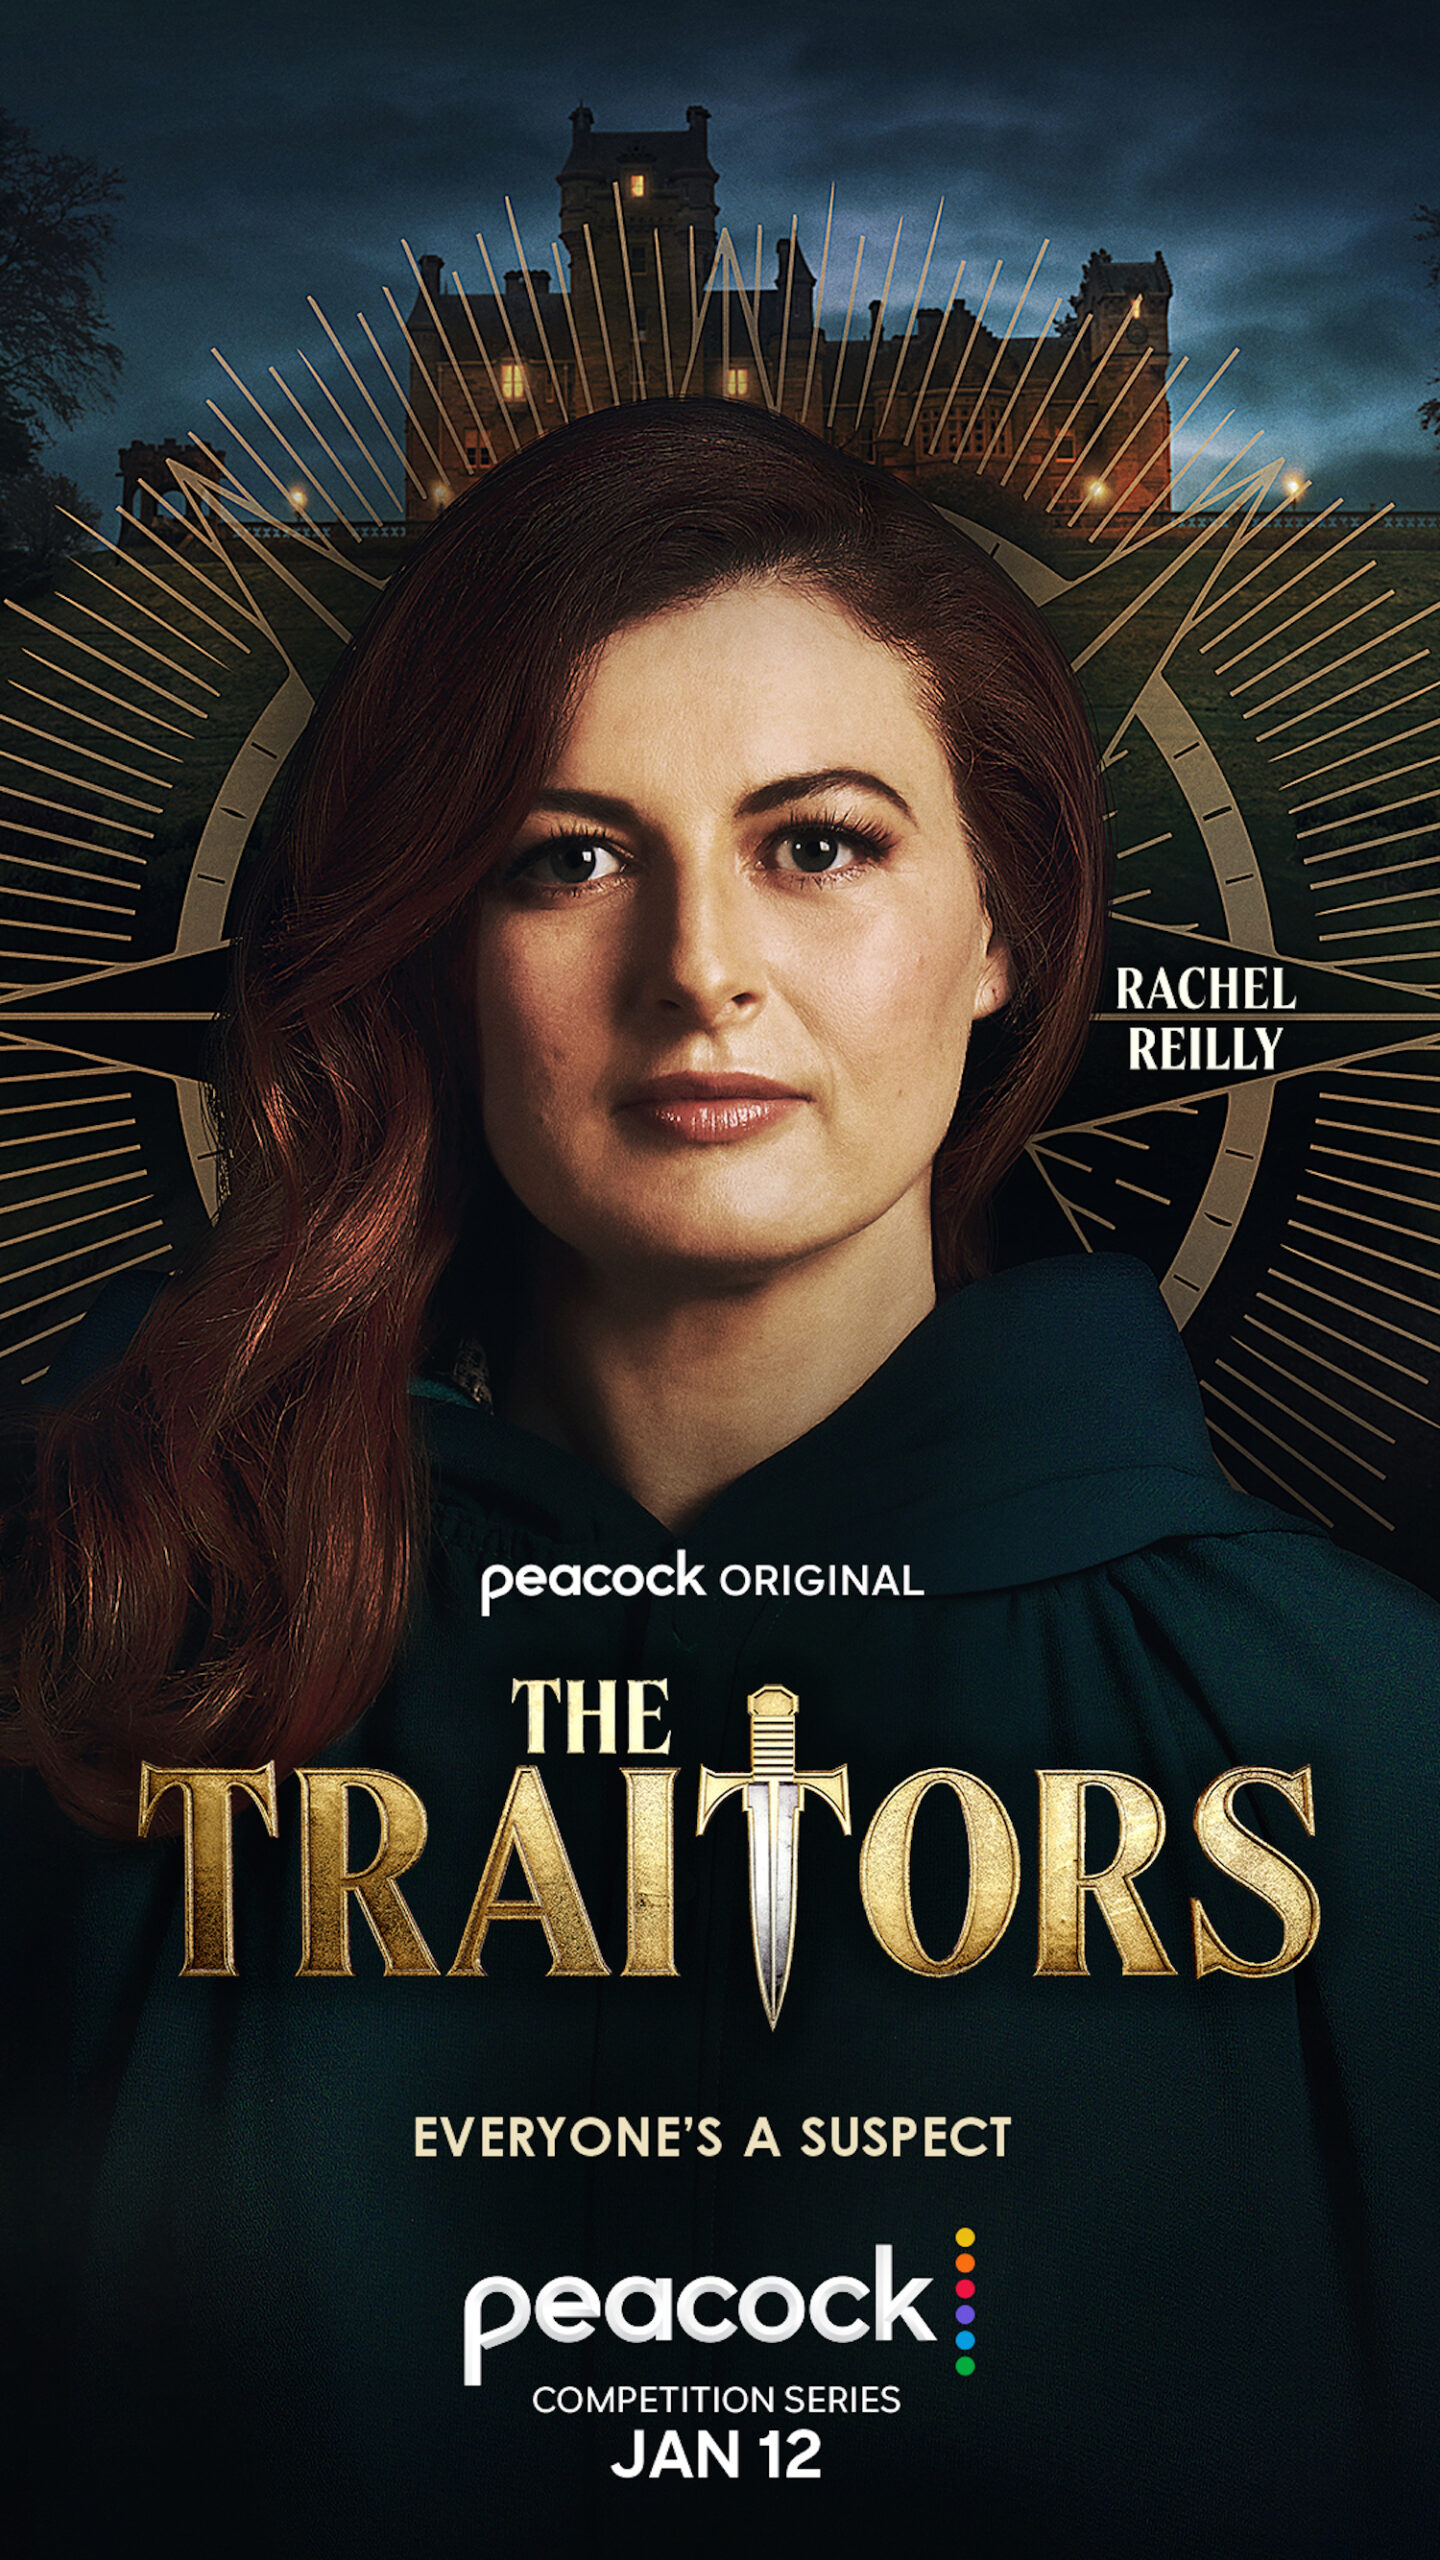 Rachel Reilly for 'The Traitors'